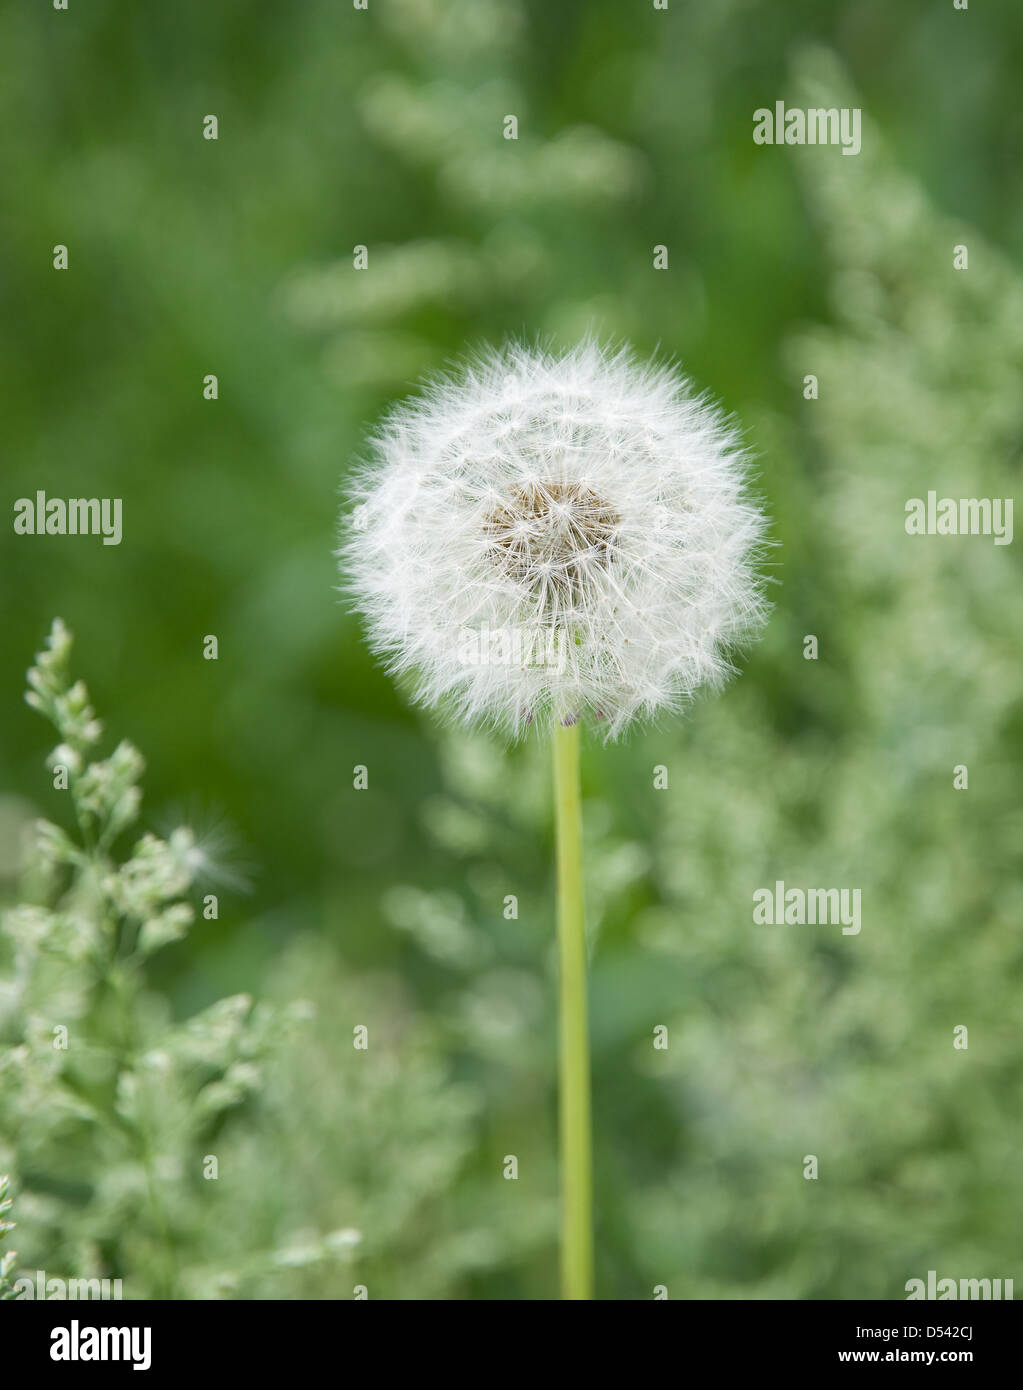 Dandelion is photographed close-up Stock Photo